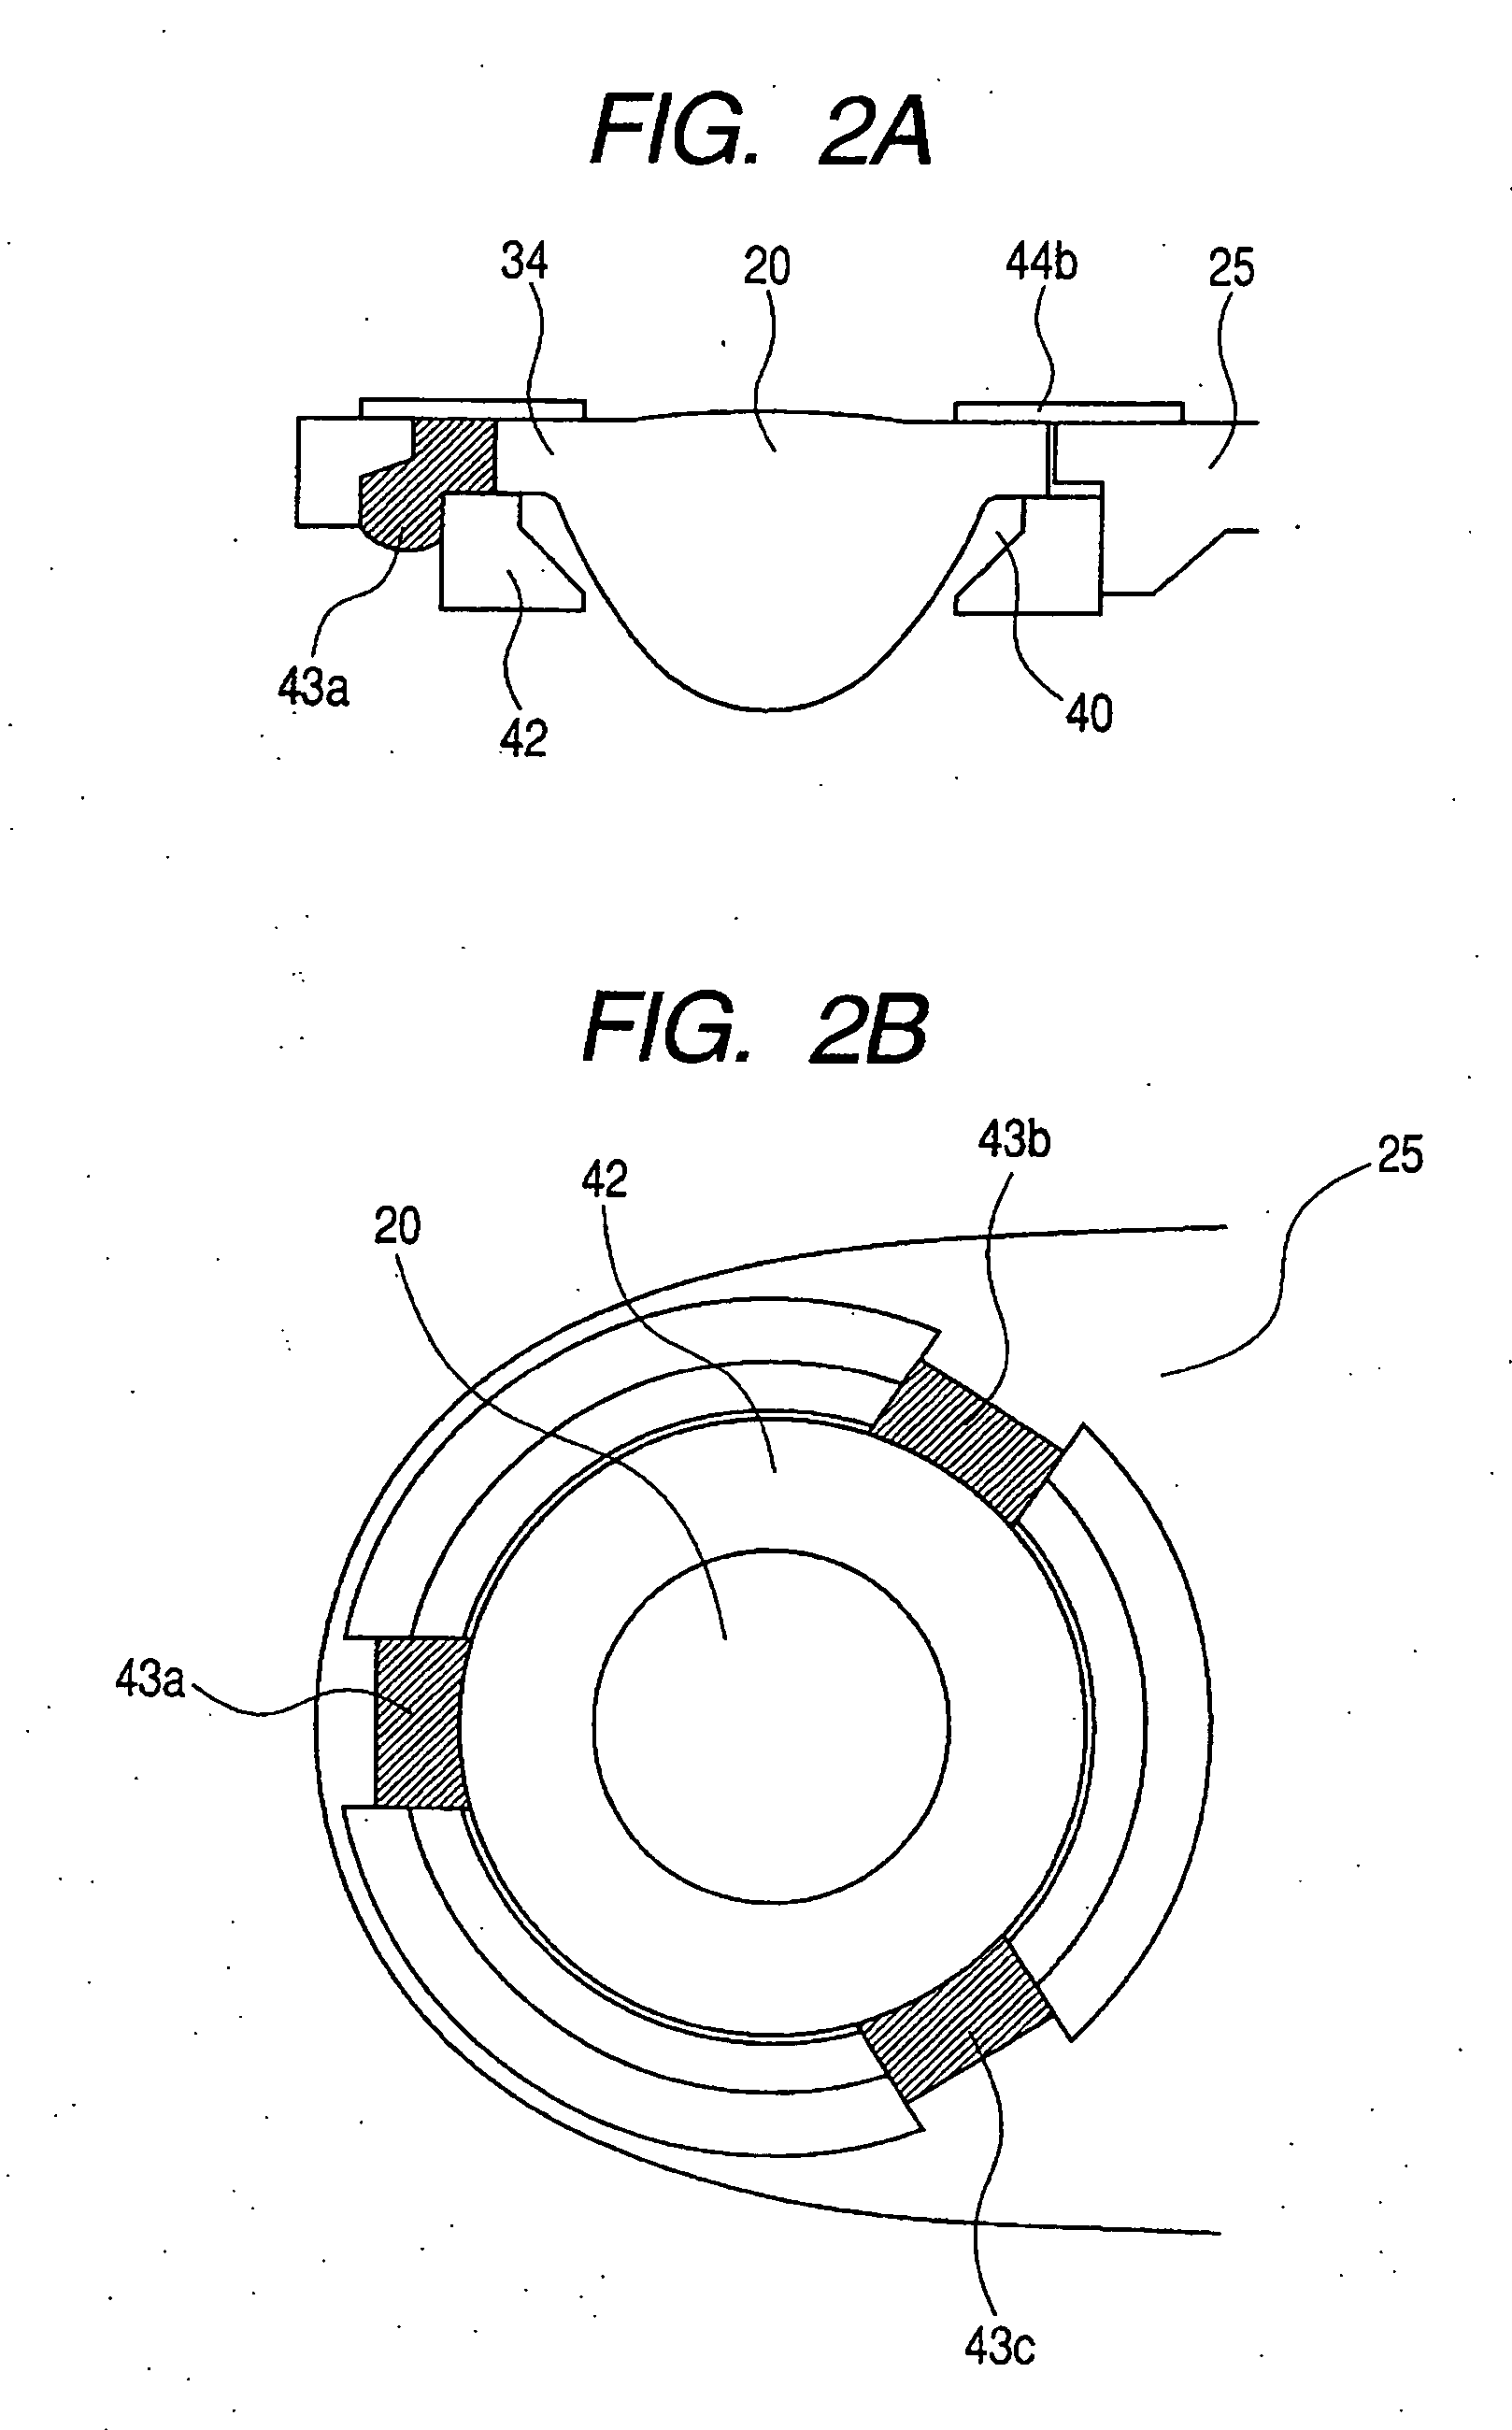 Optical pick-up and optical disk device